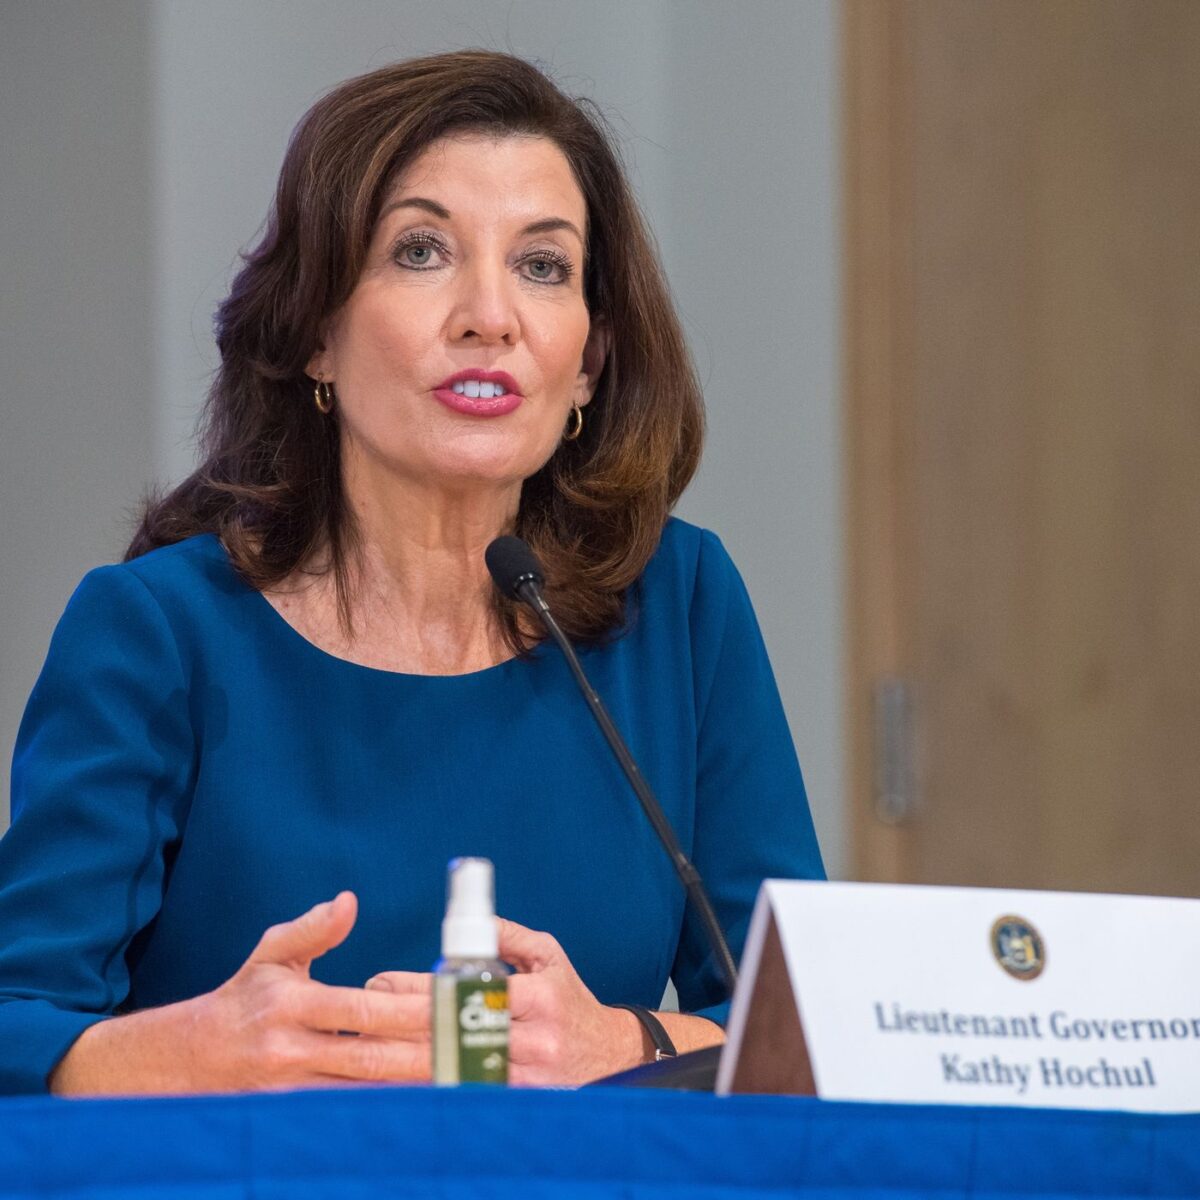 NY Governor Kathy Hochul Vows to Launch Legal Marijuana Industry